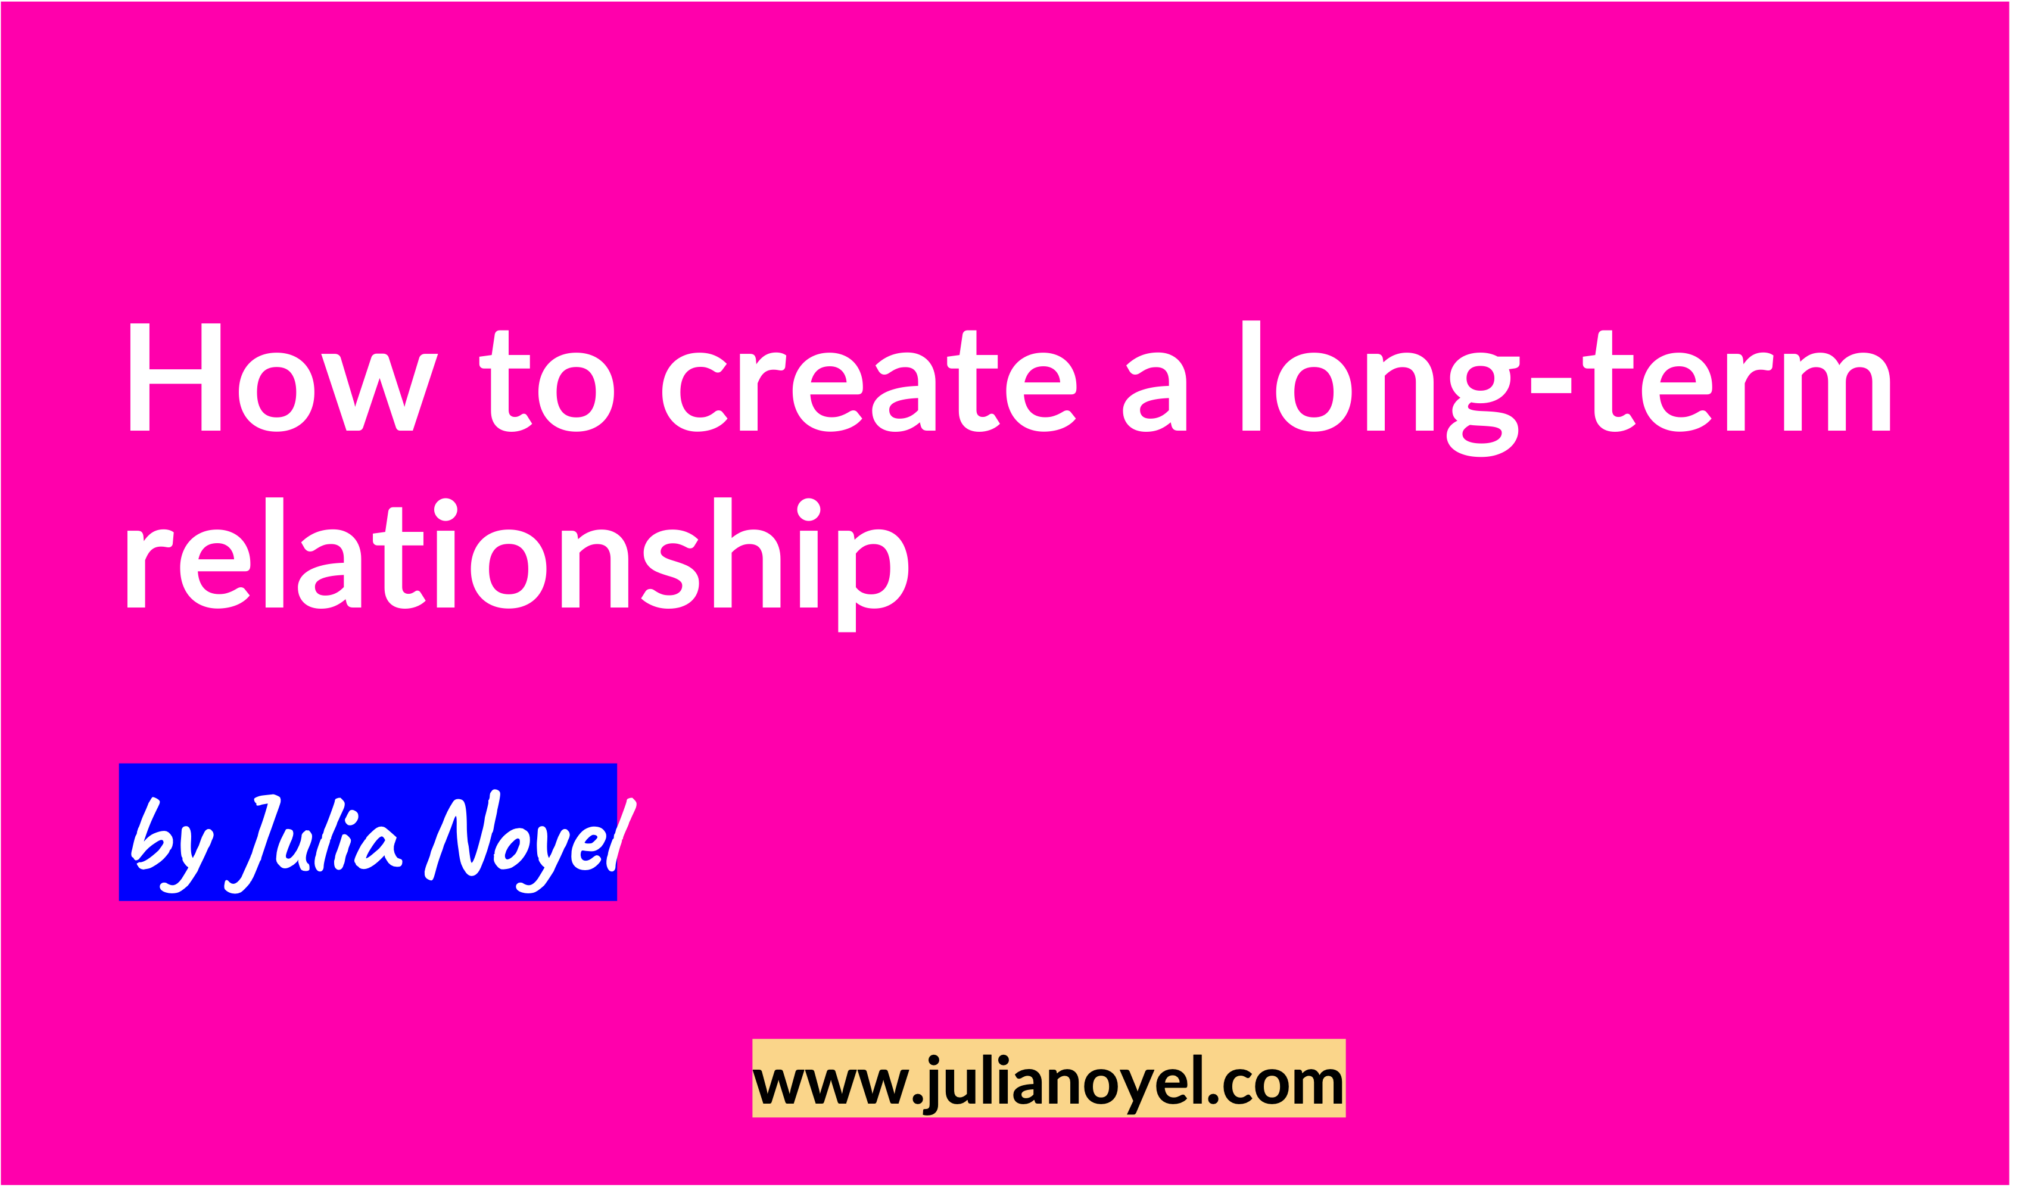 How to create a long-term relationship by Julia Noyel